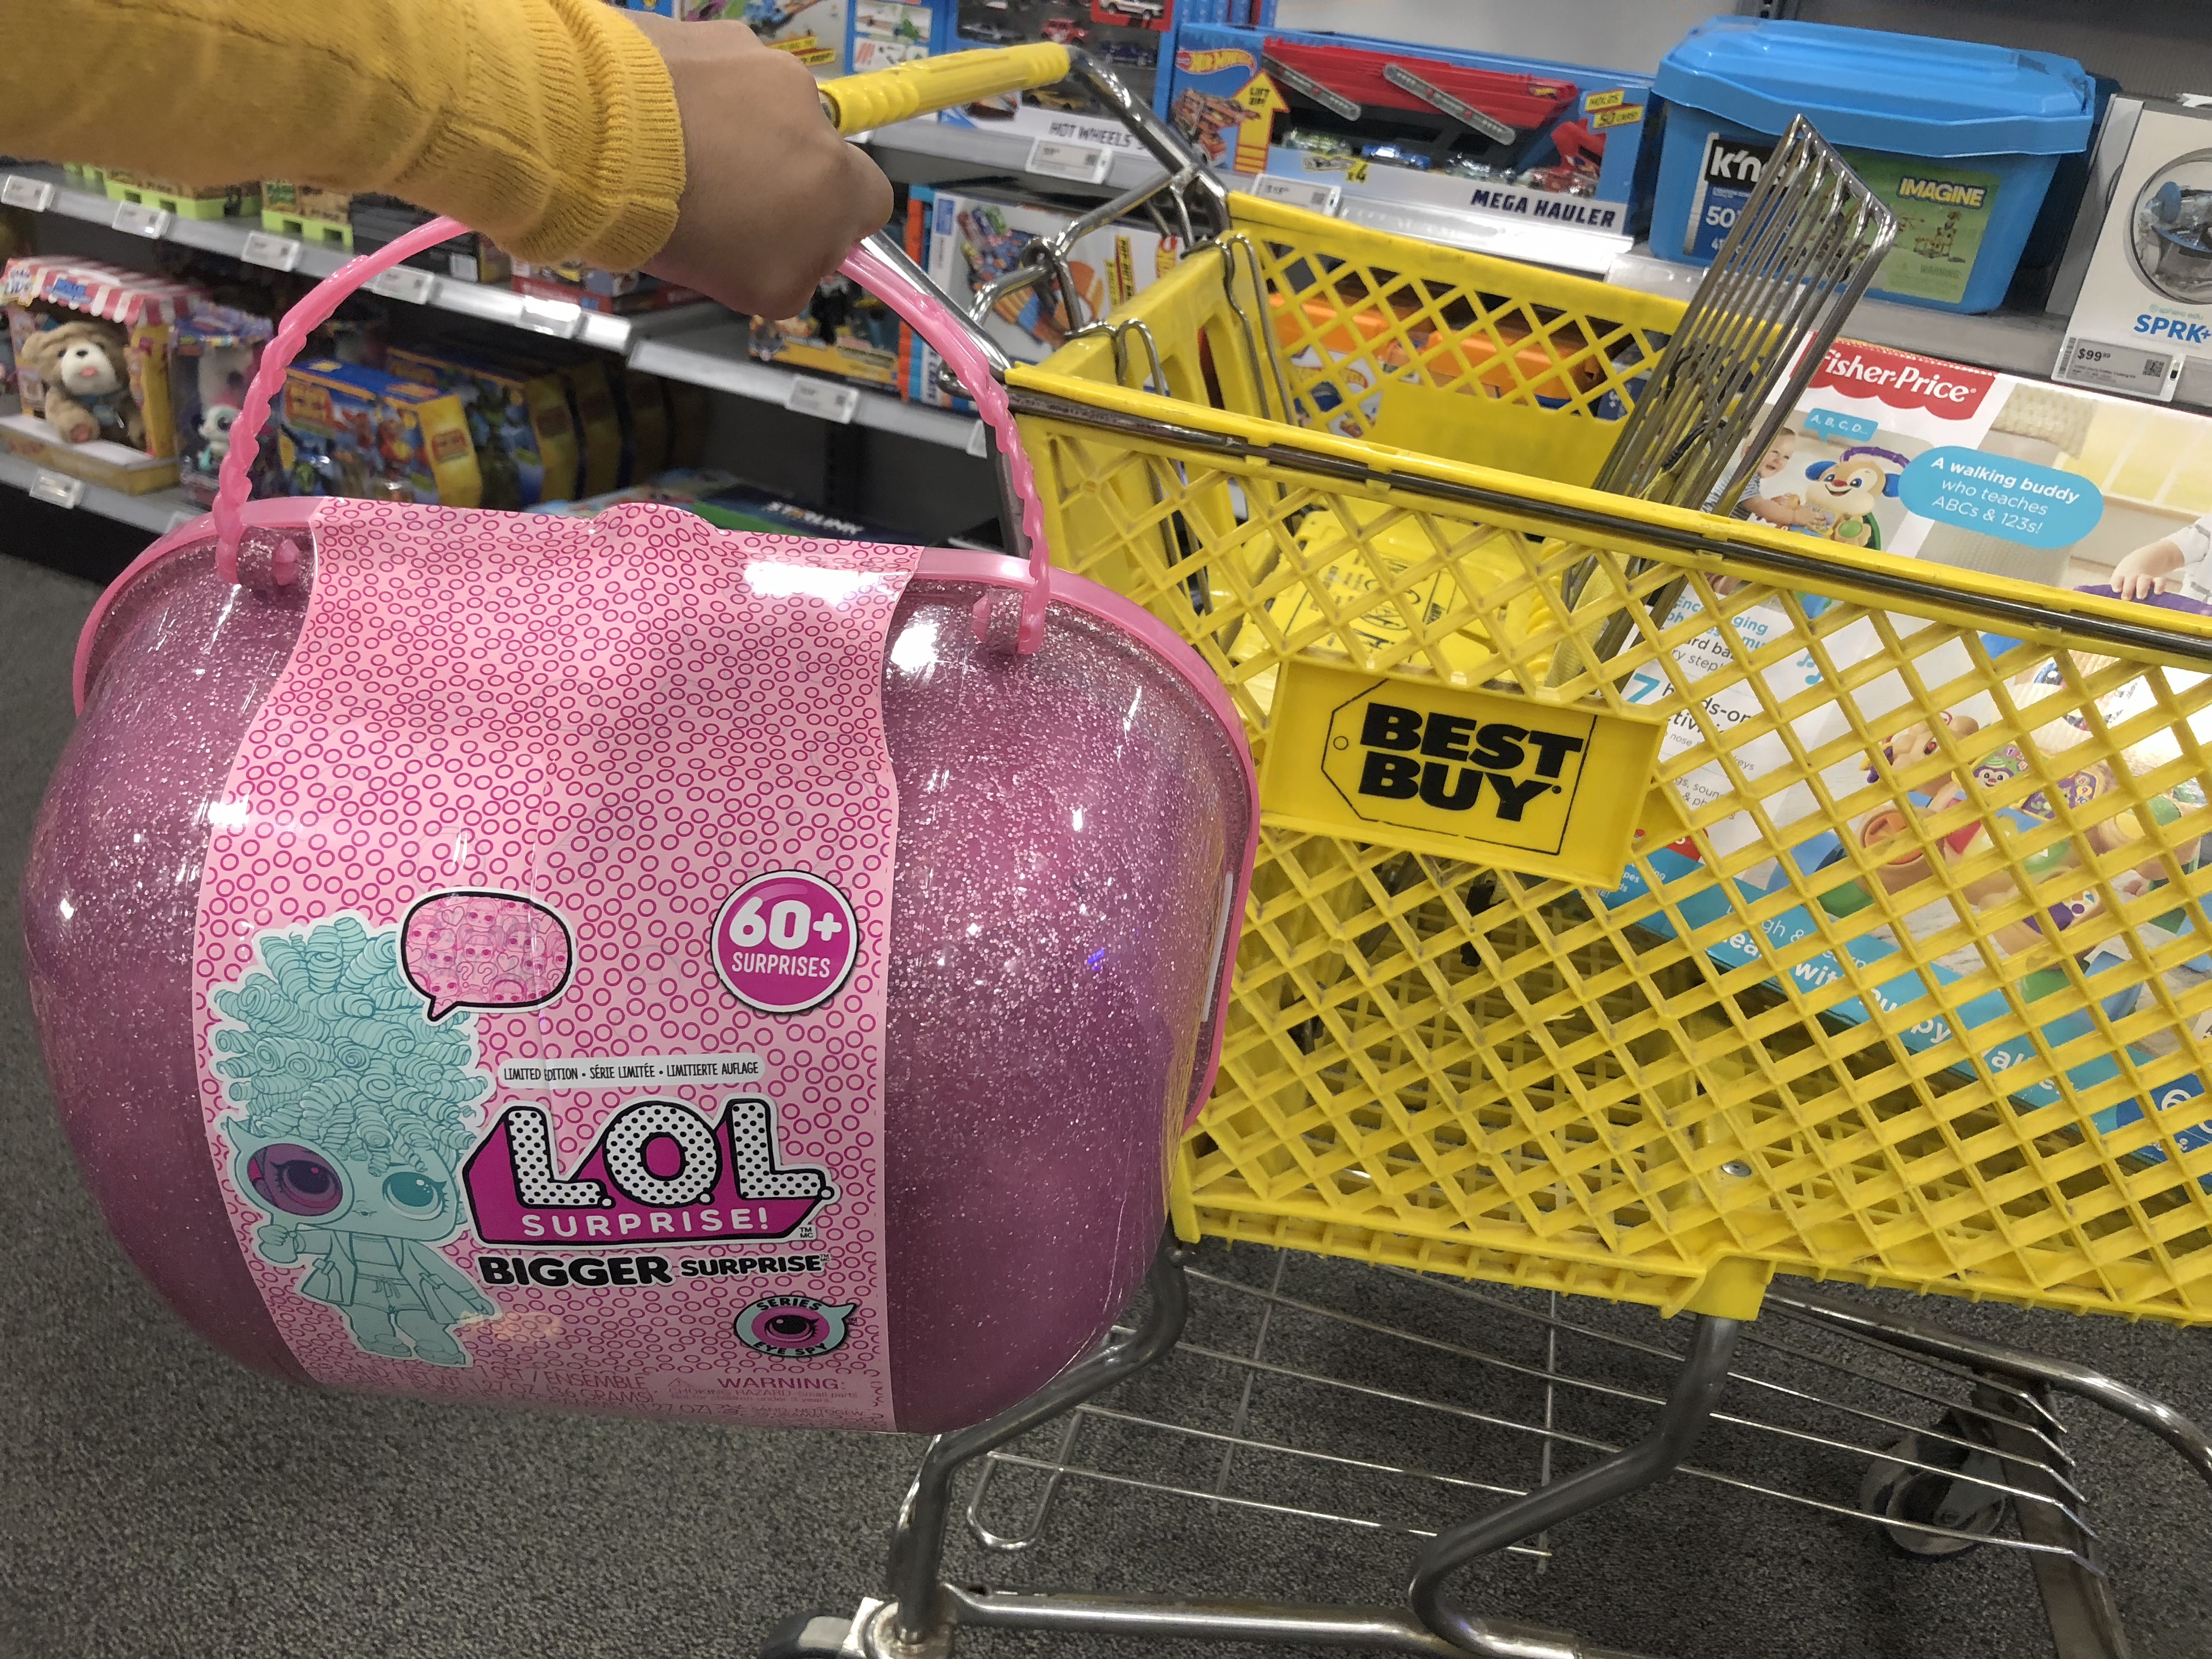 best buy 2018 toy book – LOL Surprise toy